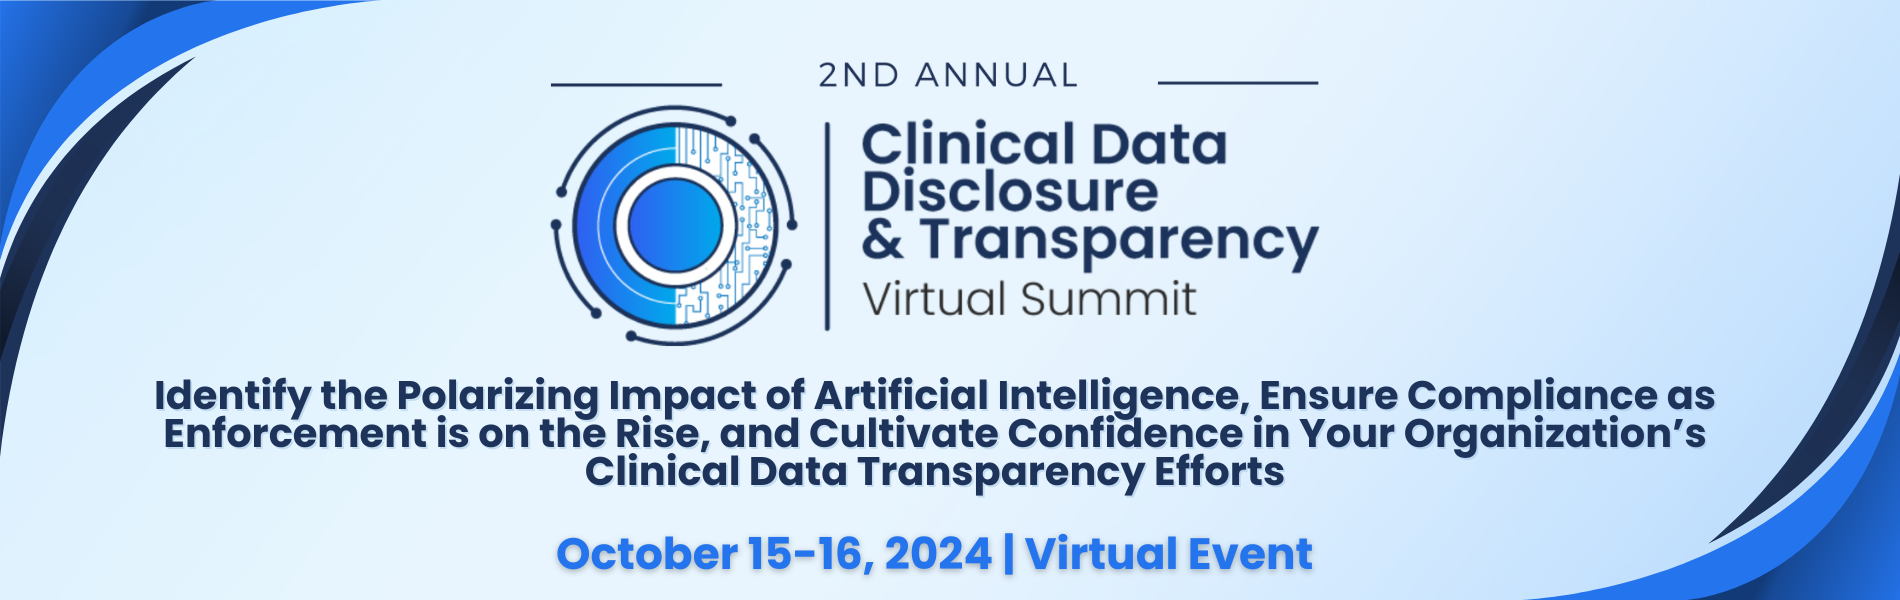 Hero banner of 2nd Annual Clinical Data Disclosure & Transparency, October 15-16, 2024. Virtual Event. Identify the Polarizing Impact of Artificial Intelligence, Ensure Compliance as regulatory Authorities Crack Down on Enforcement, and Cultivate Confidence in Your Organization’s Clinical Transparency Efforts